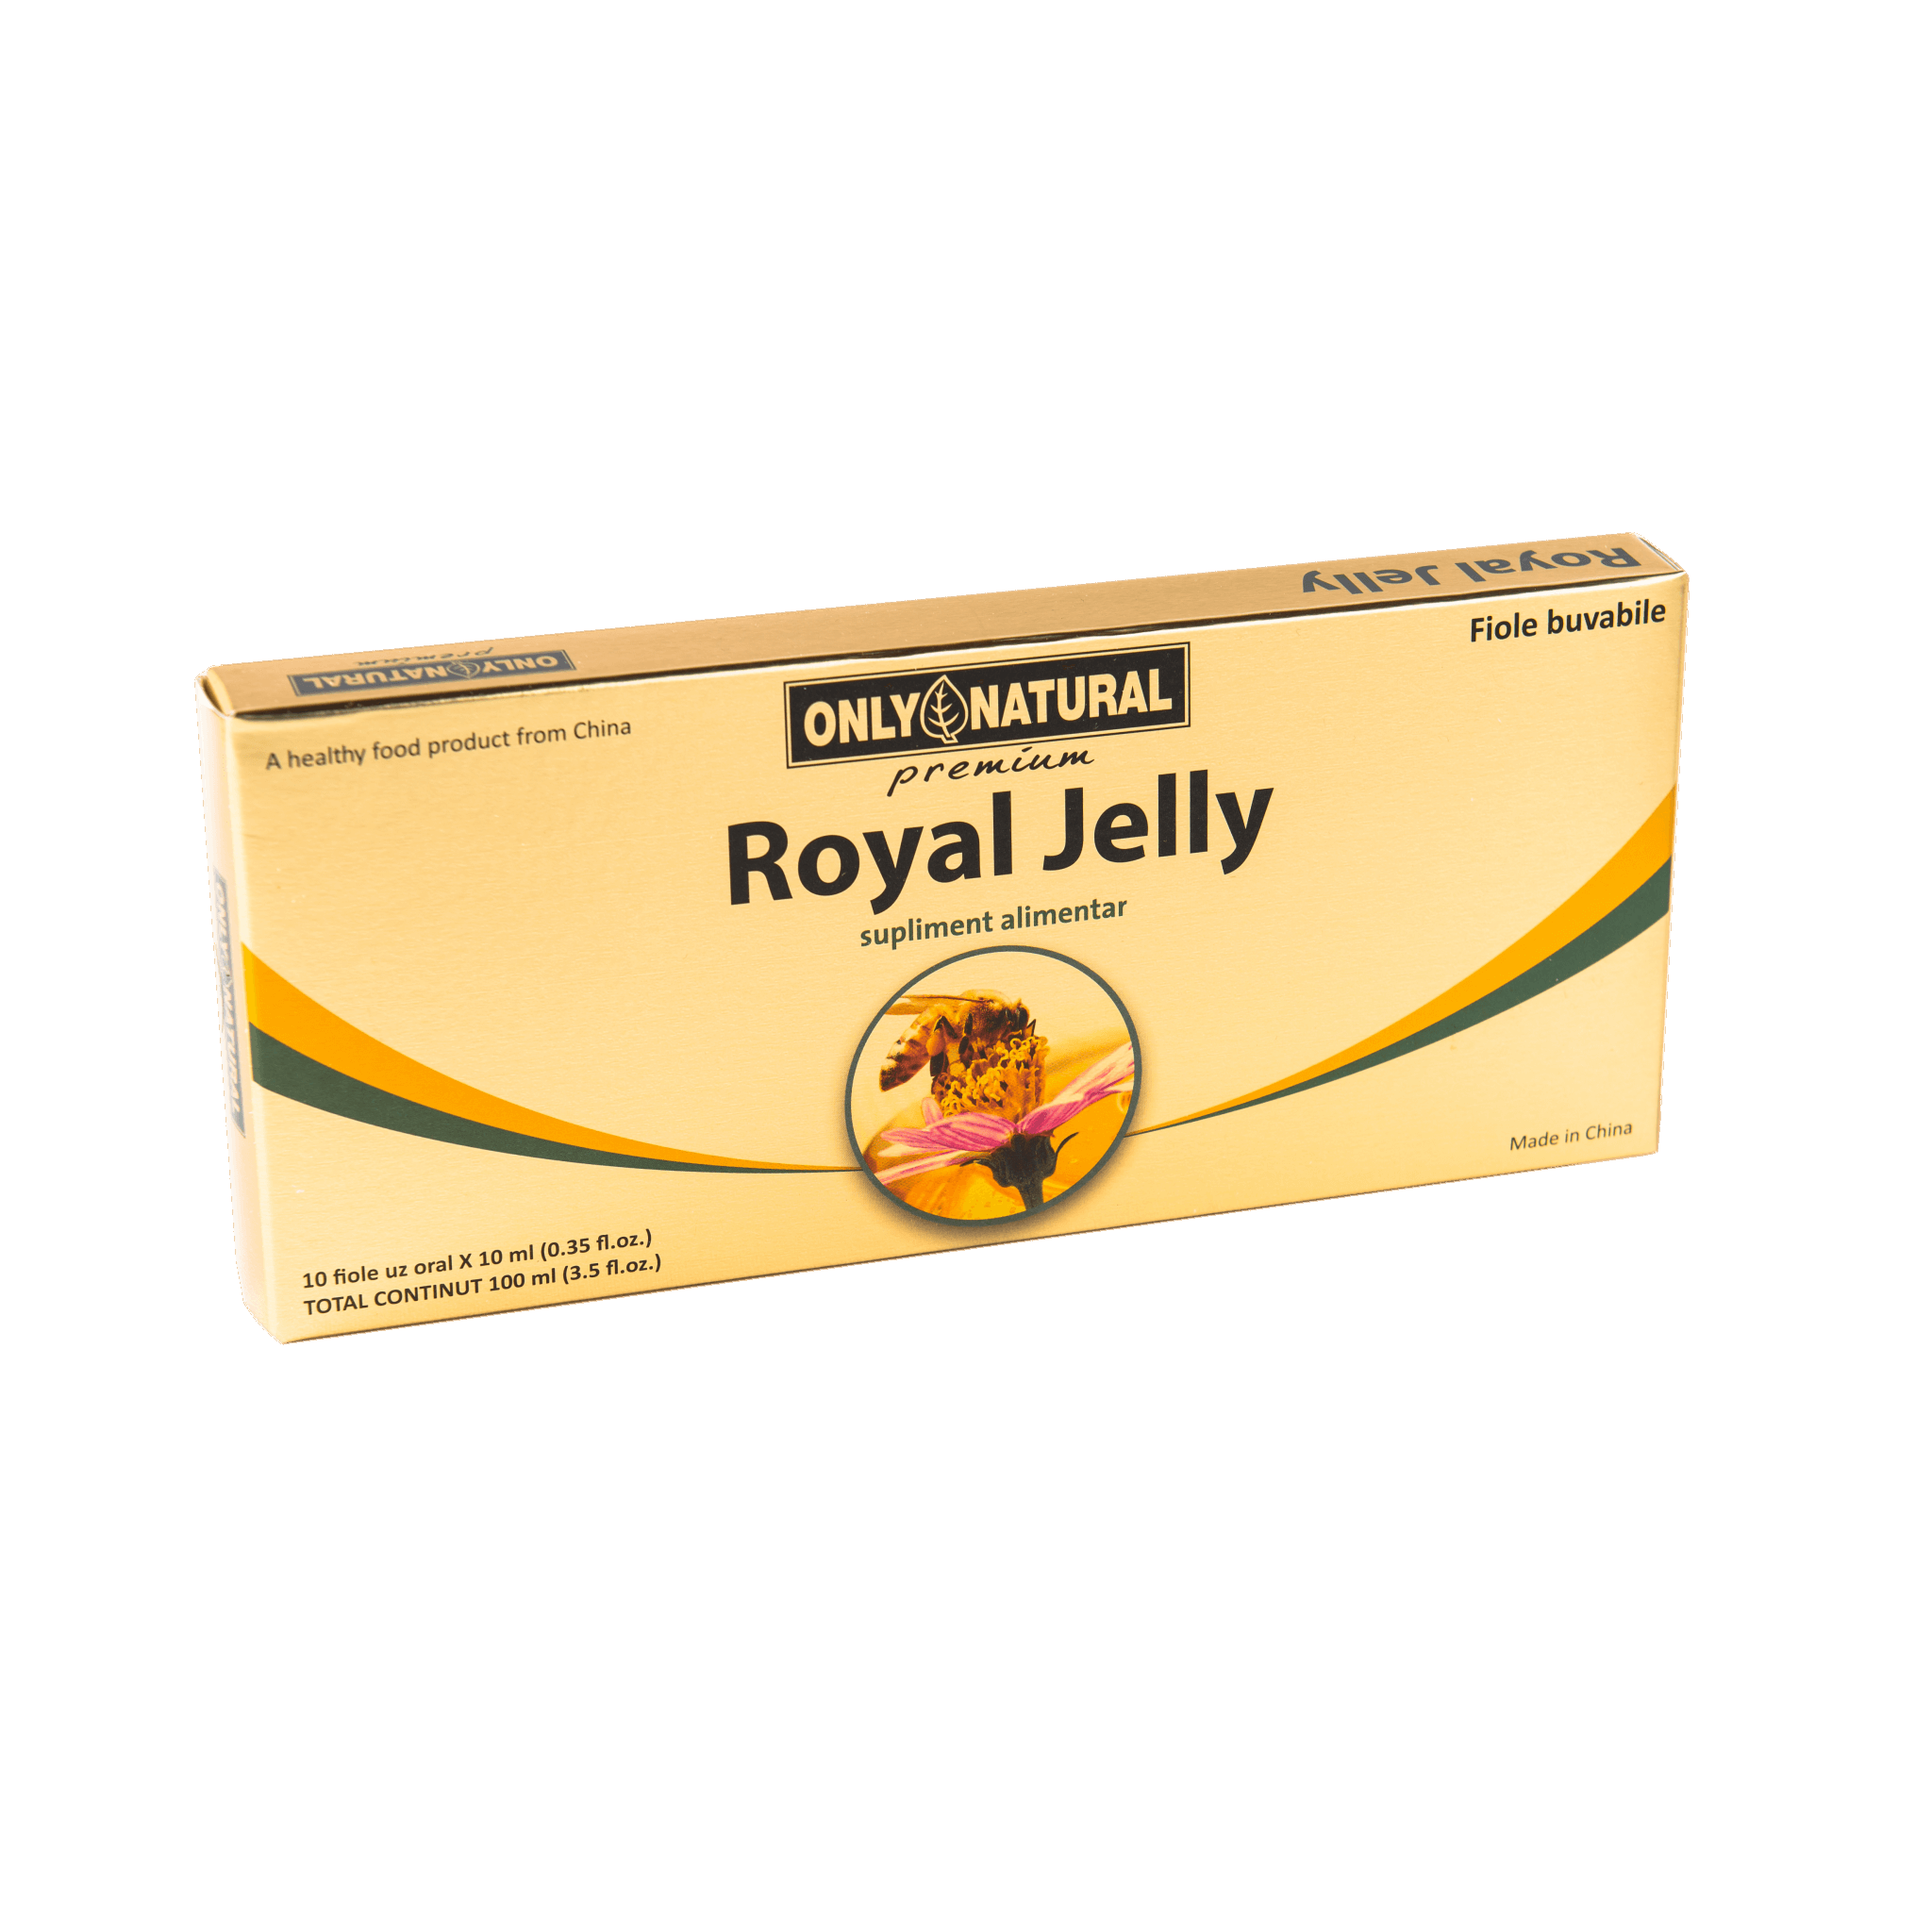 ONLY NATURAL ROYAL JELLY 10 FIOLE X 10ML Pret Mic helpnet imagine noua